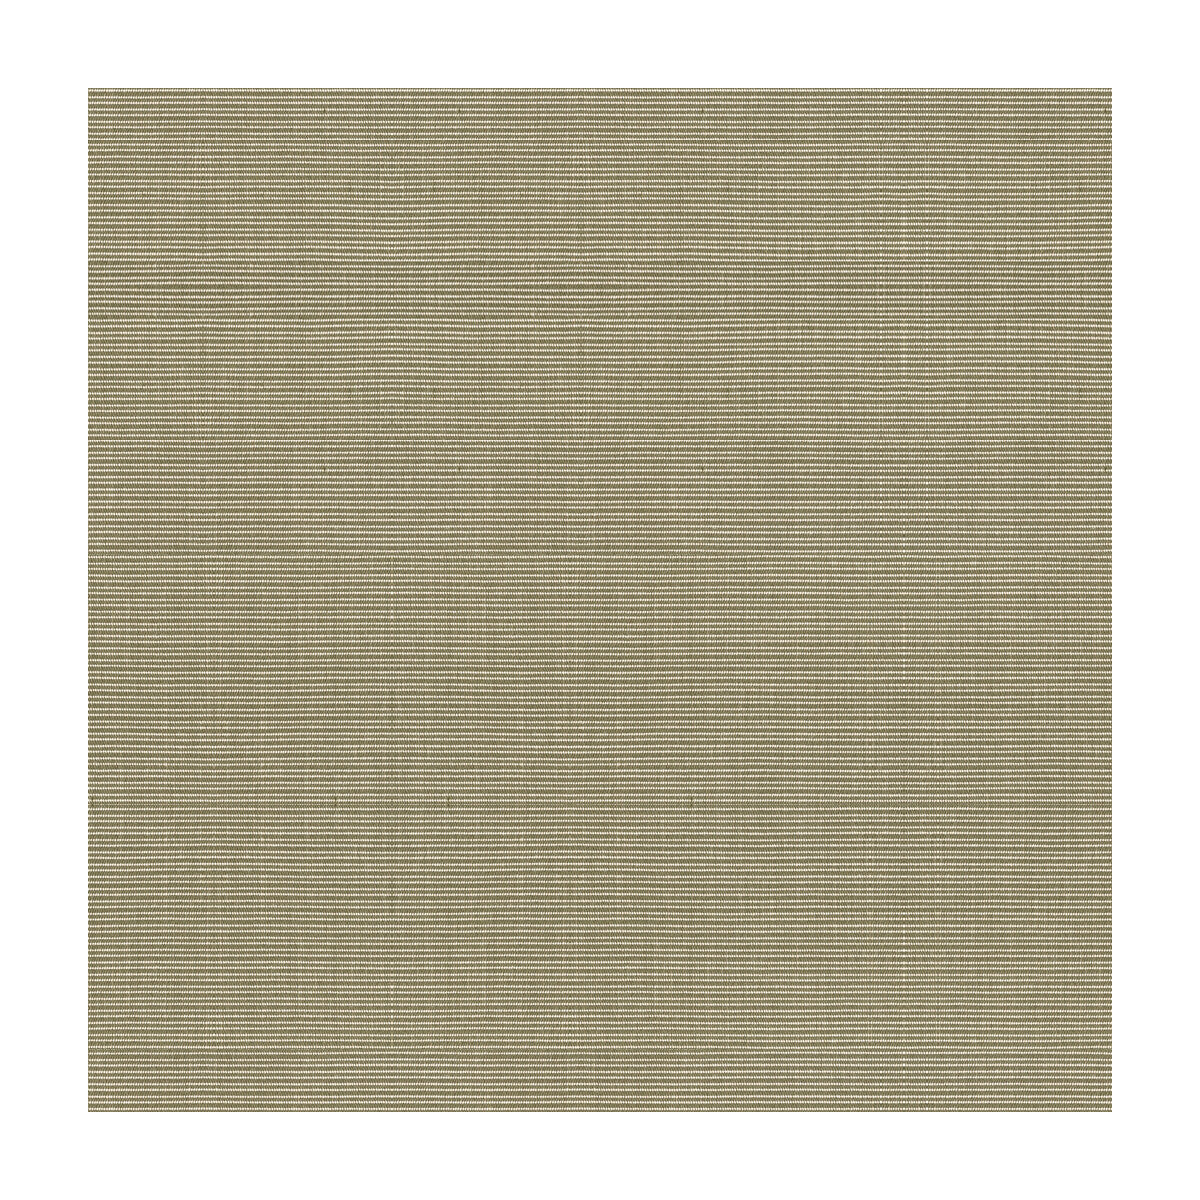 Aport fabric in coconut color - pattern 33525.11.0 - by Kravet Design in the Waterworks II collection